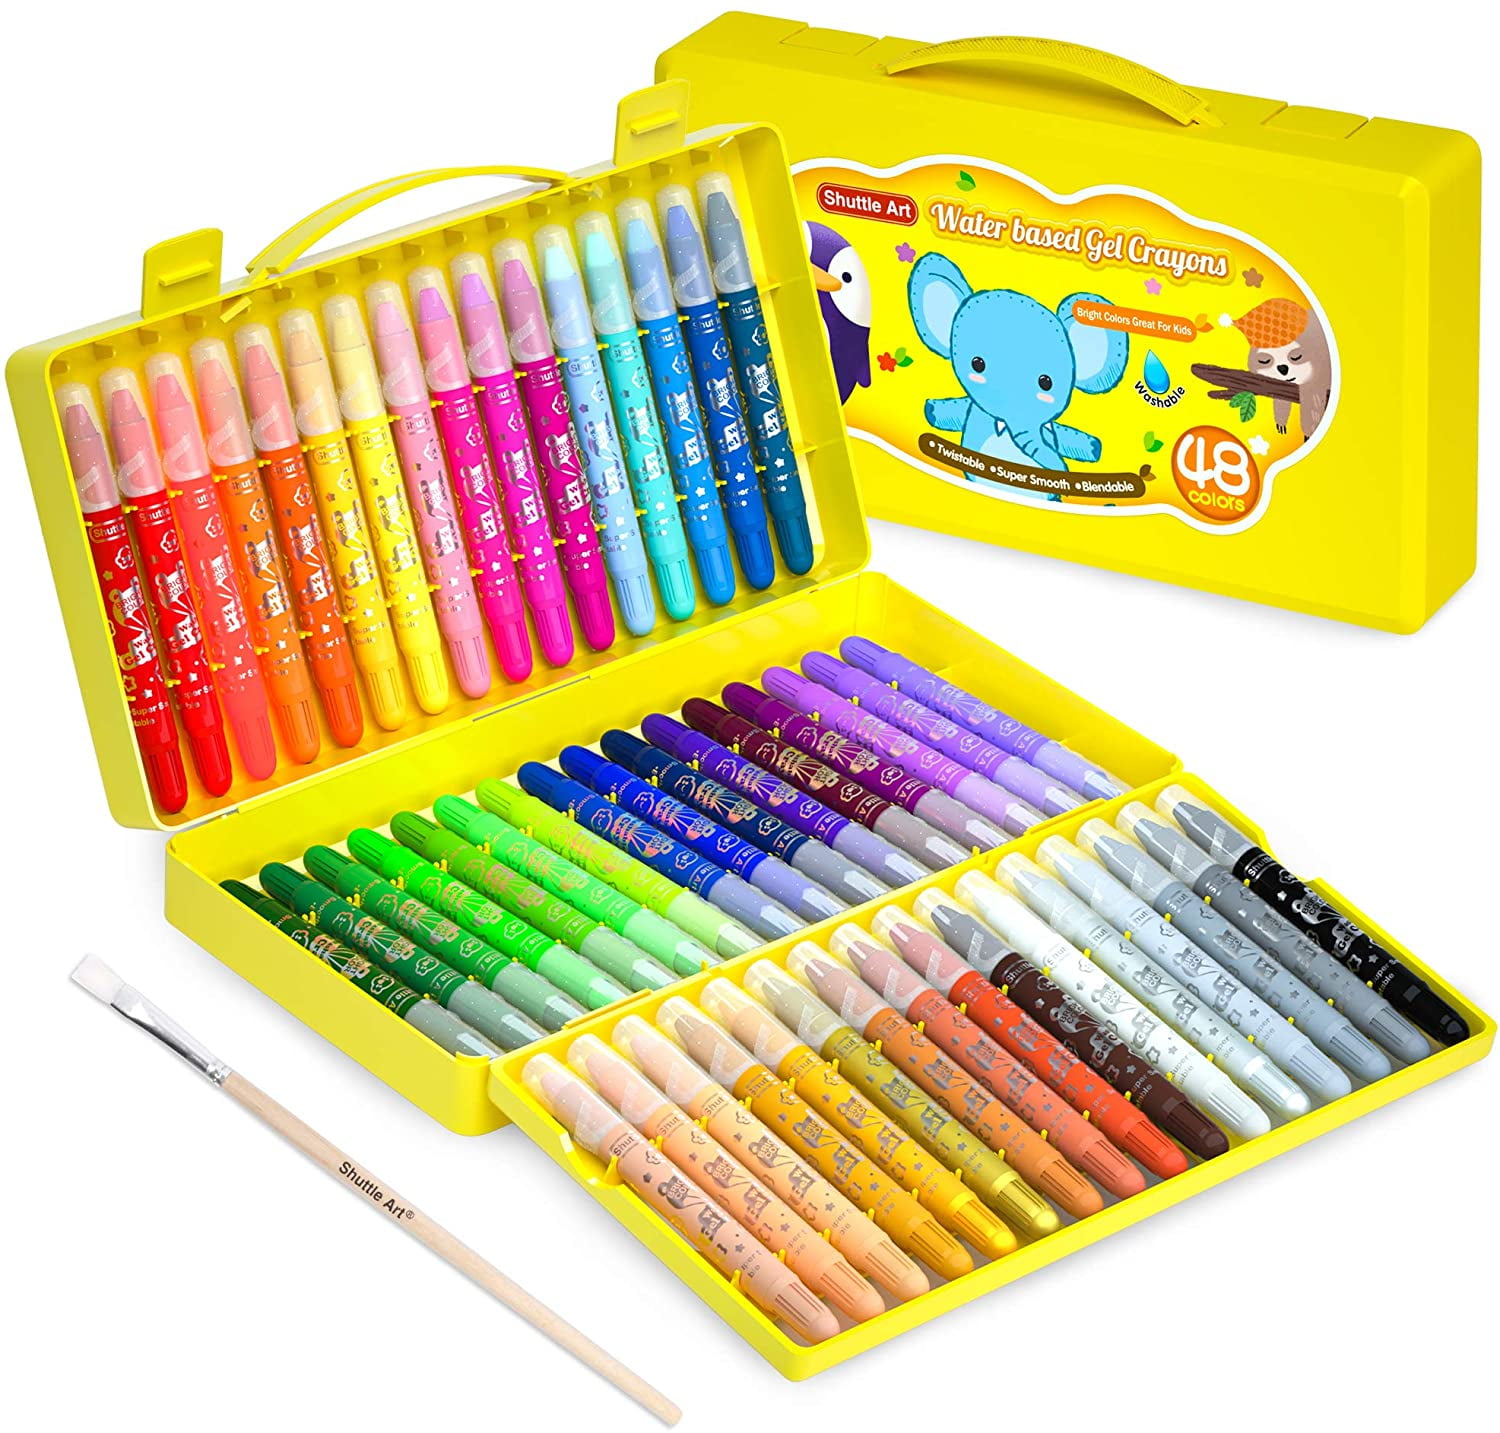 Educational Gift for Boys and Girls 3+ 36 Colors Washable Crayon Kids At Home Activities School Painting Supplies Lekebaby Toddler Crayons 